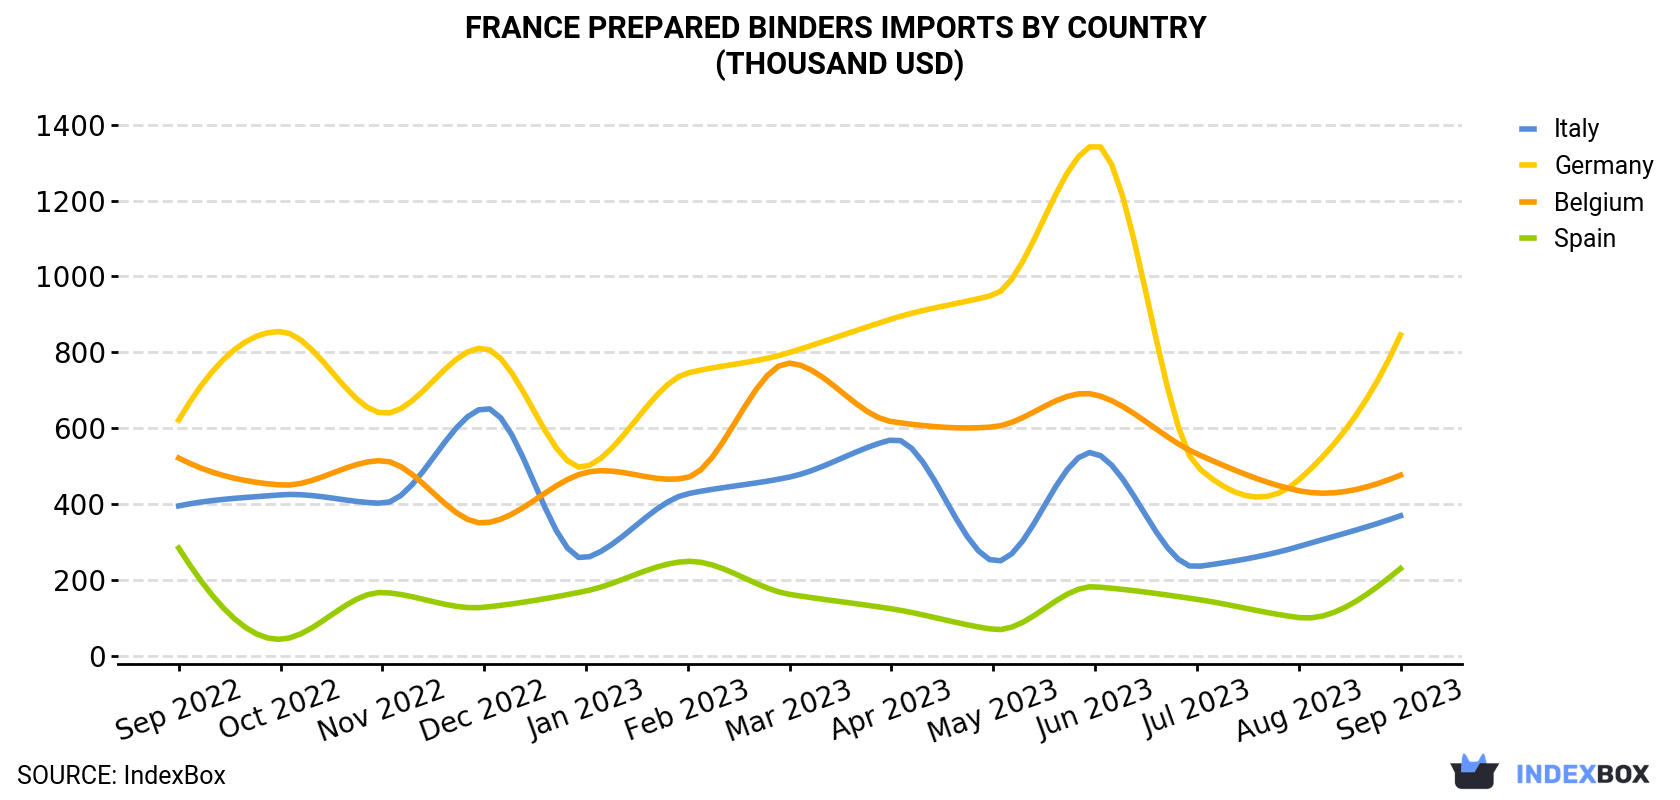 France Prepared Binders Imports By Country (Thousand USD)